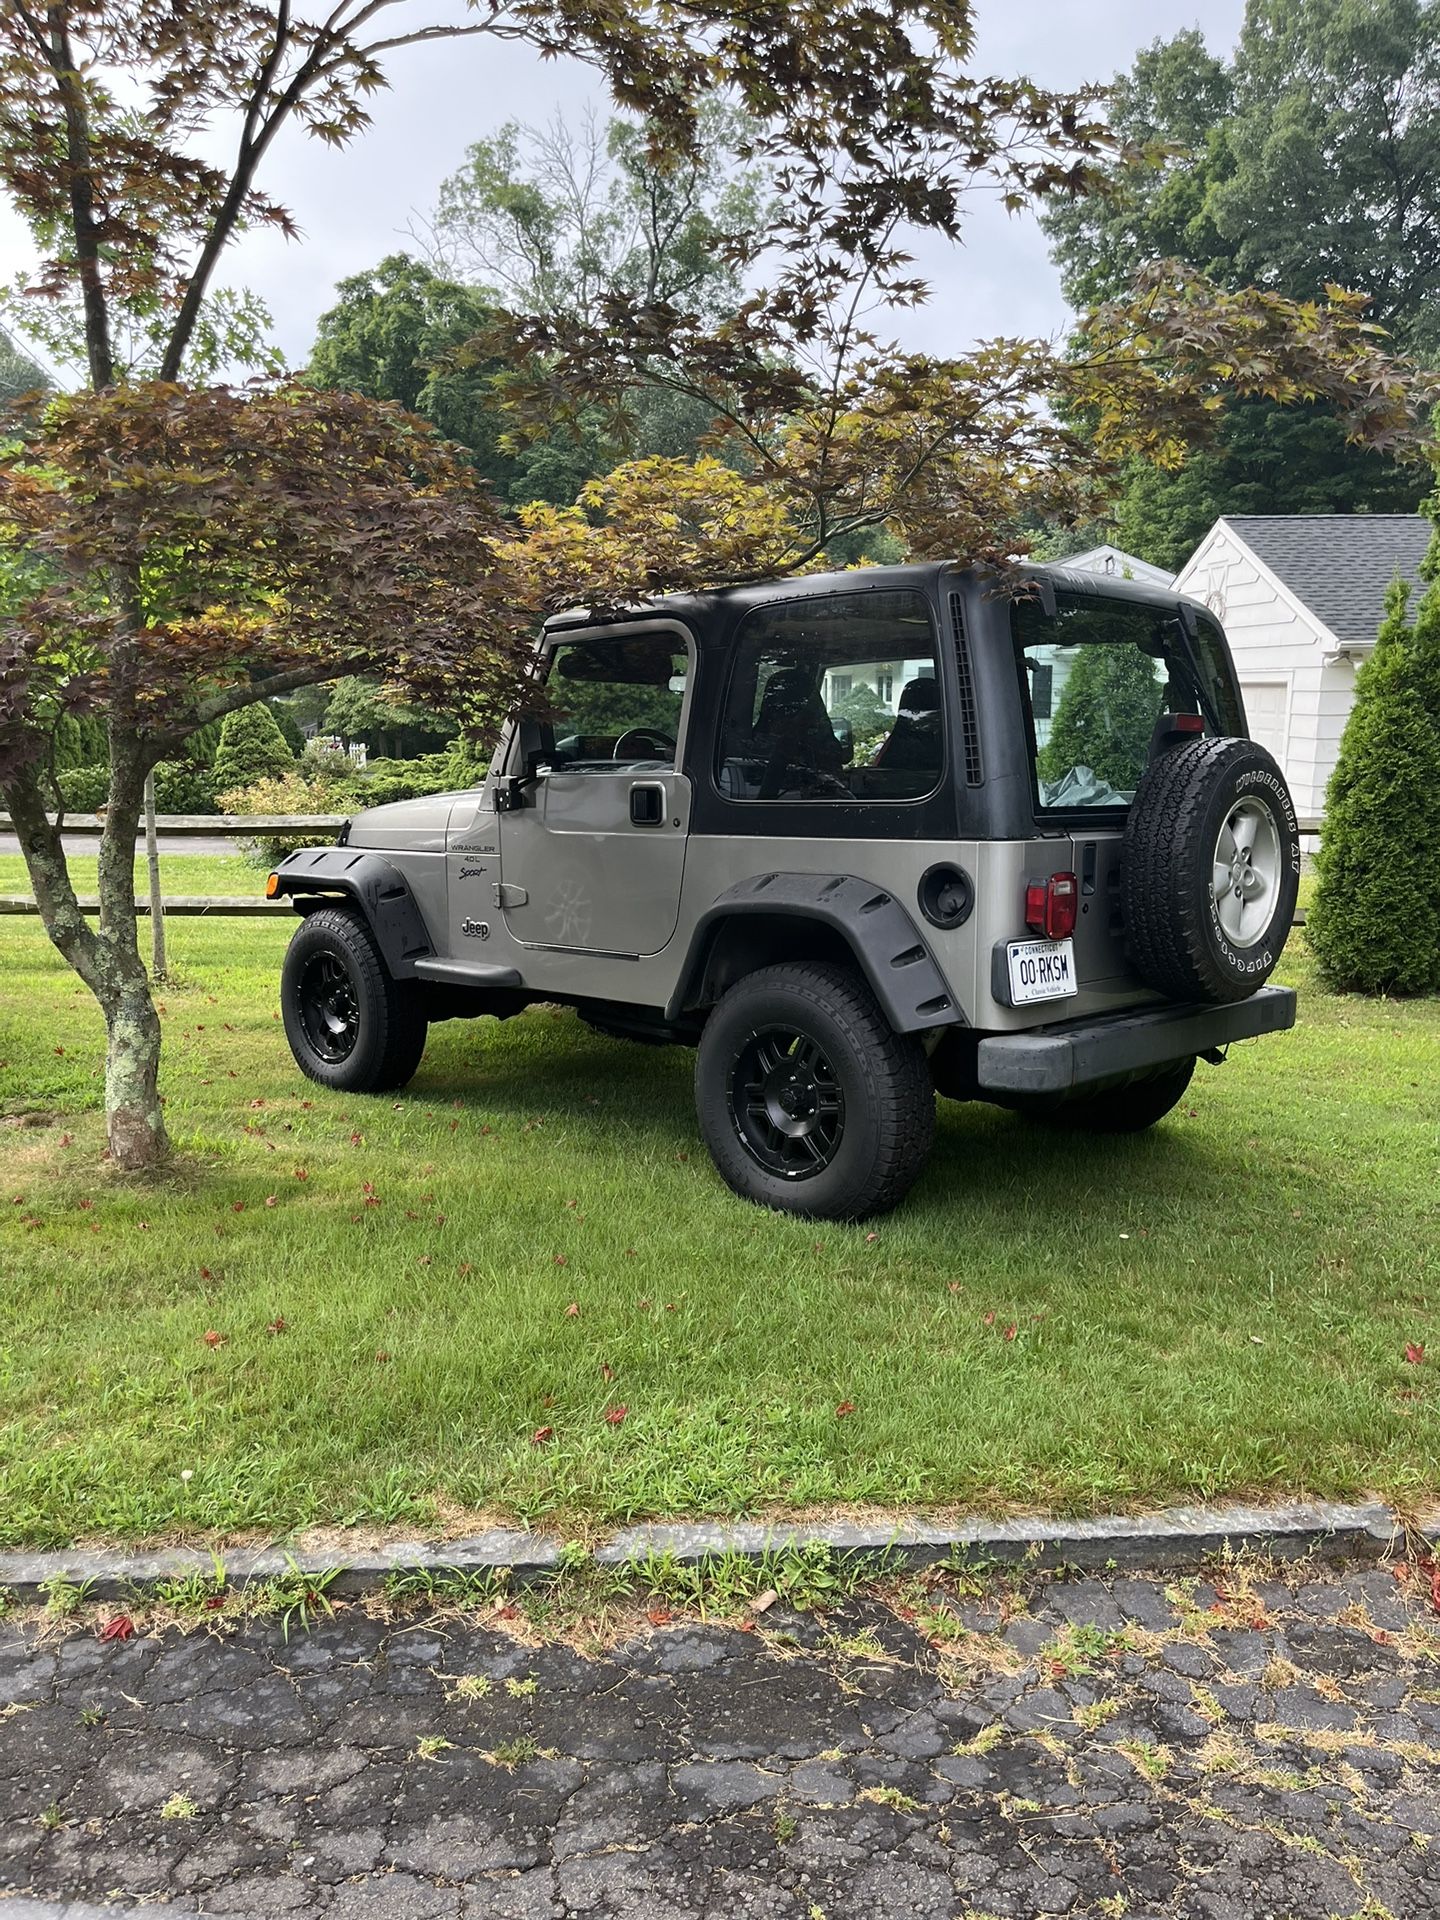 2000 Jeep Wrangler for Sale in Orange, CT - OfferUp